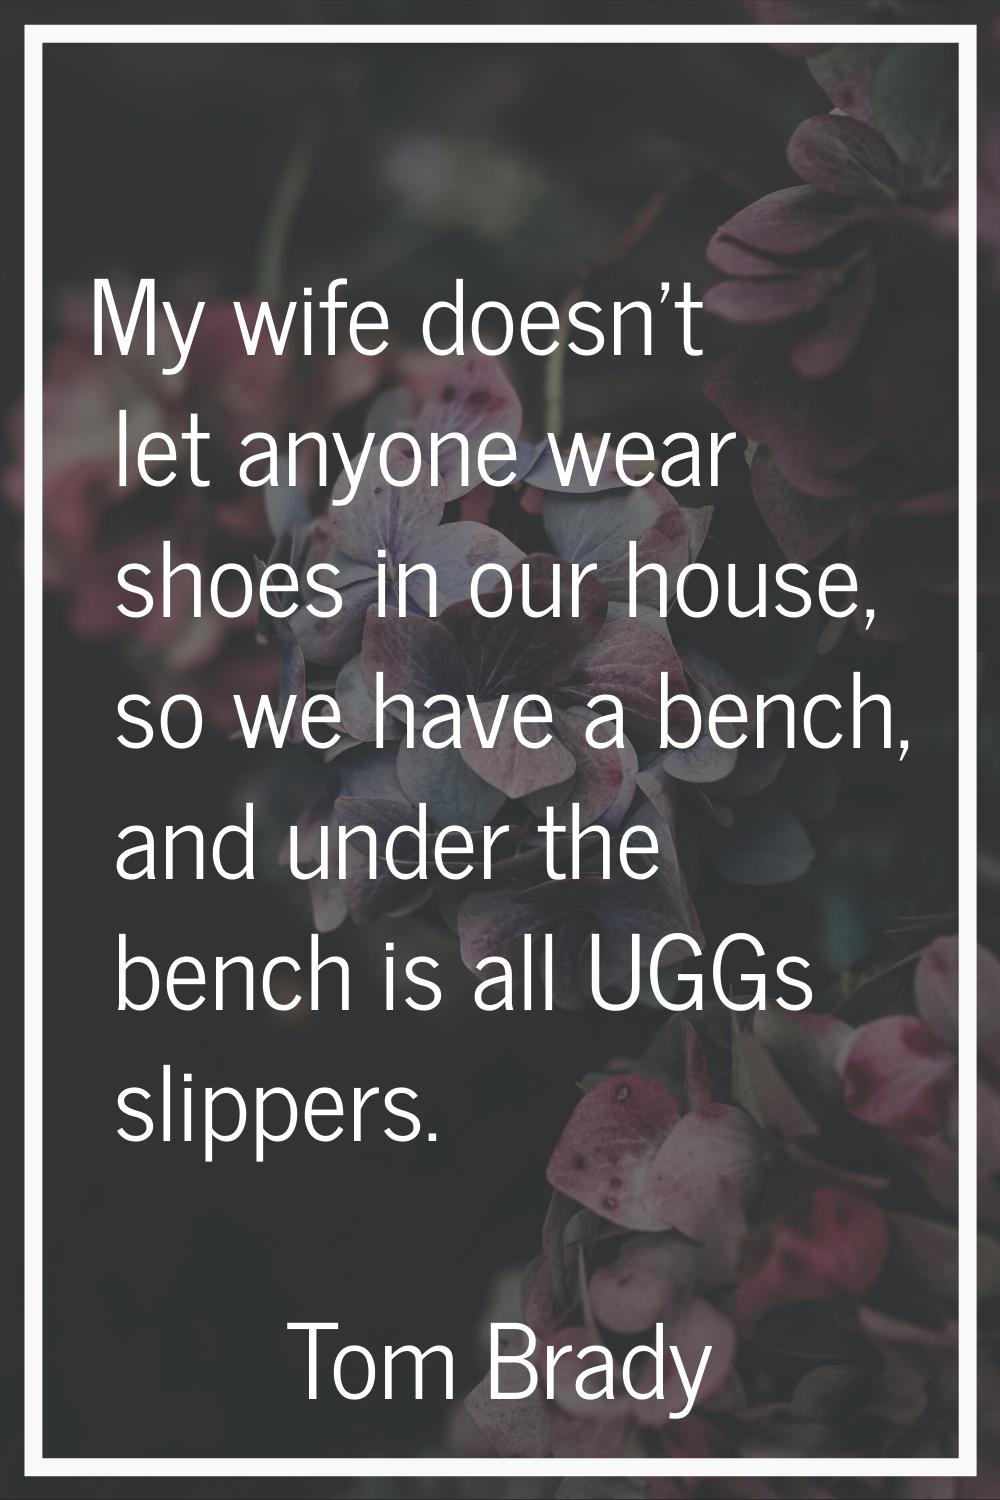 My wife doesn't let anyone wear shoes in our house, so we have a bench, and under the bench is all 